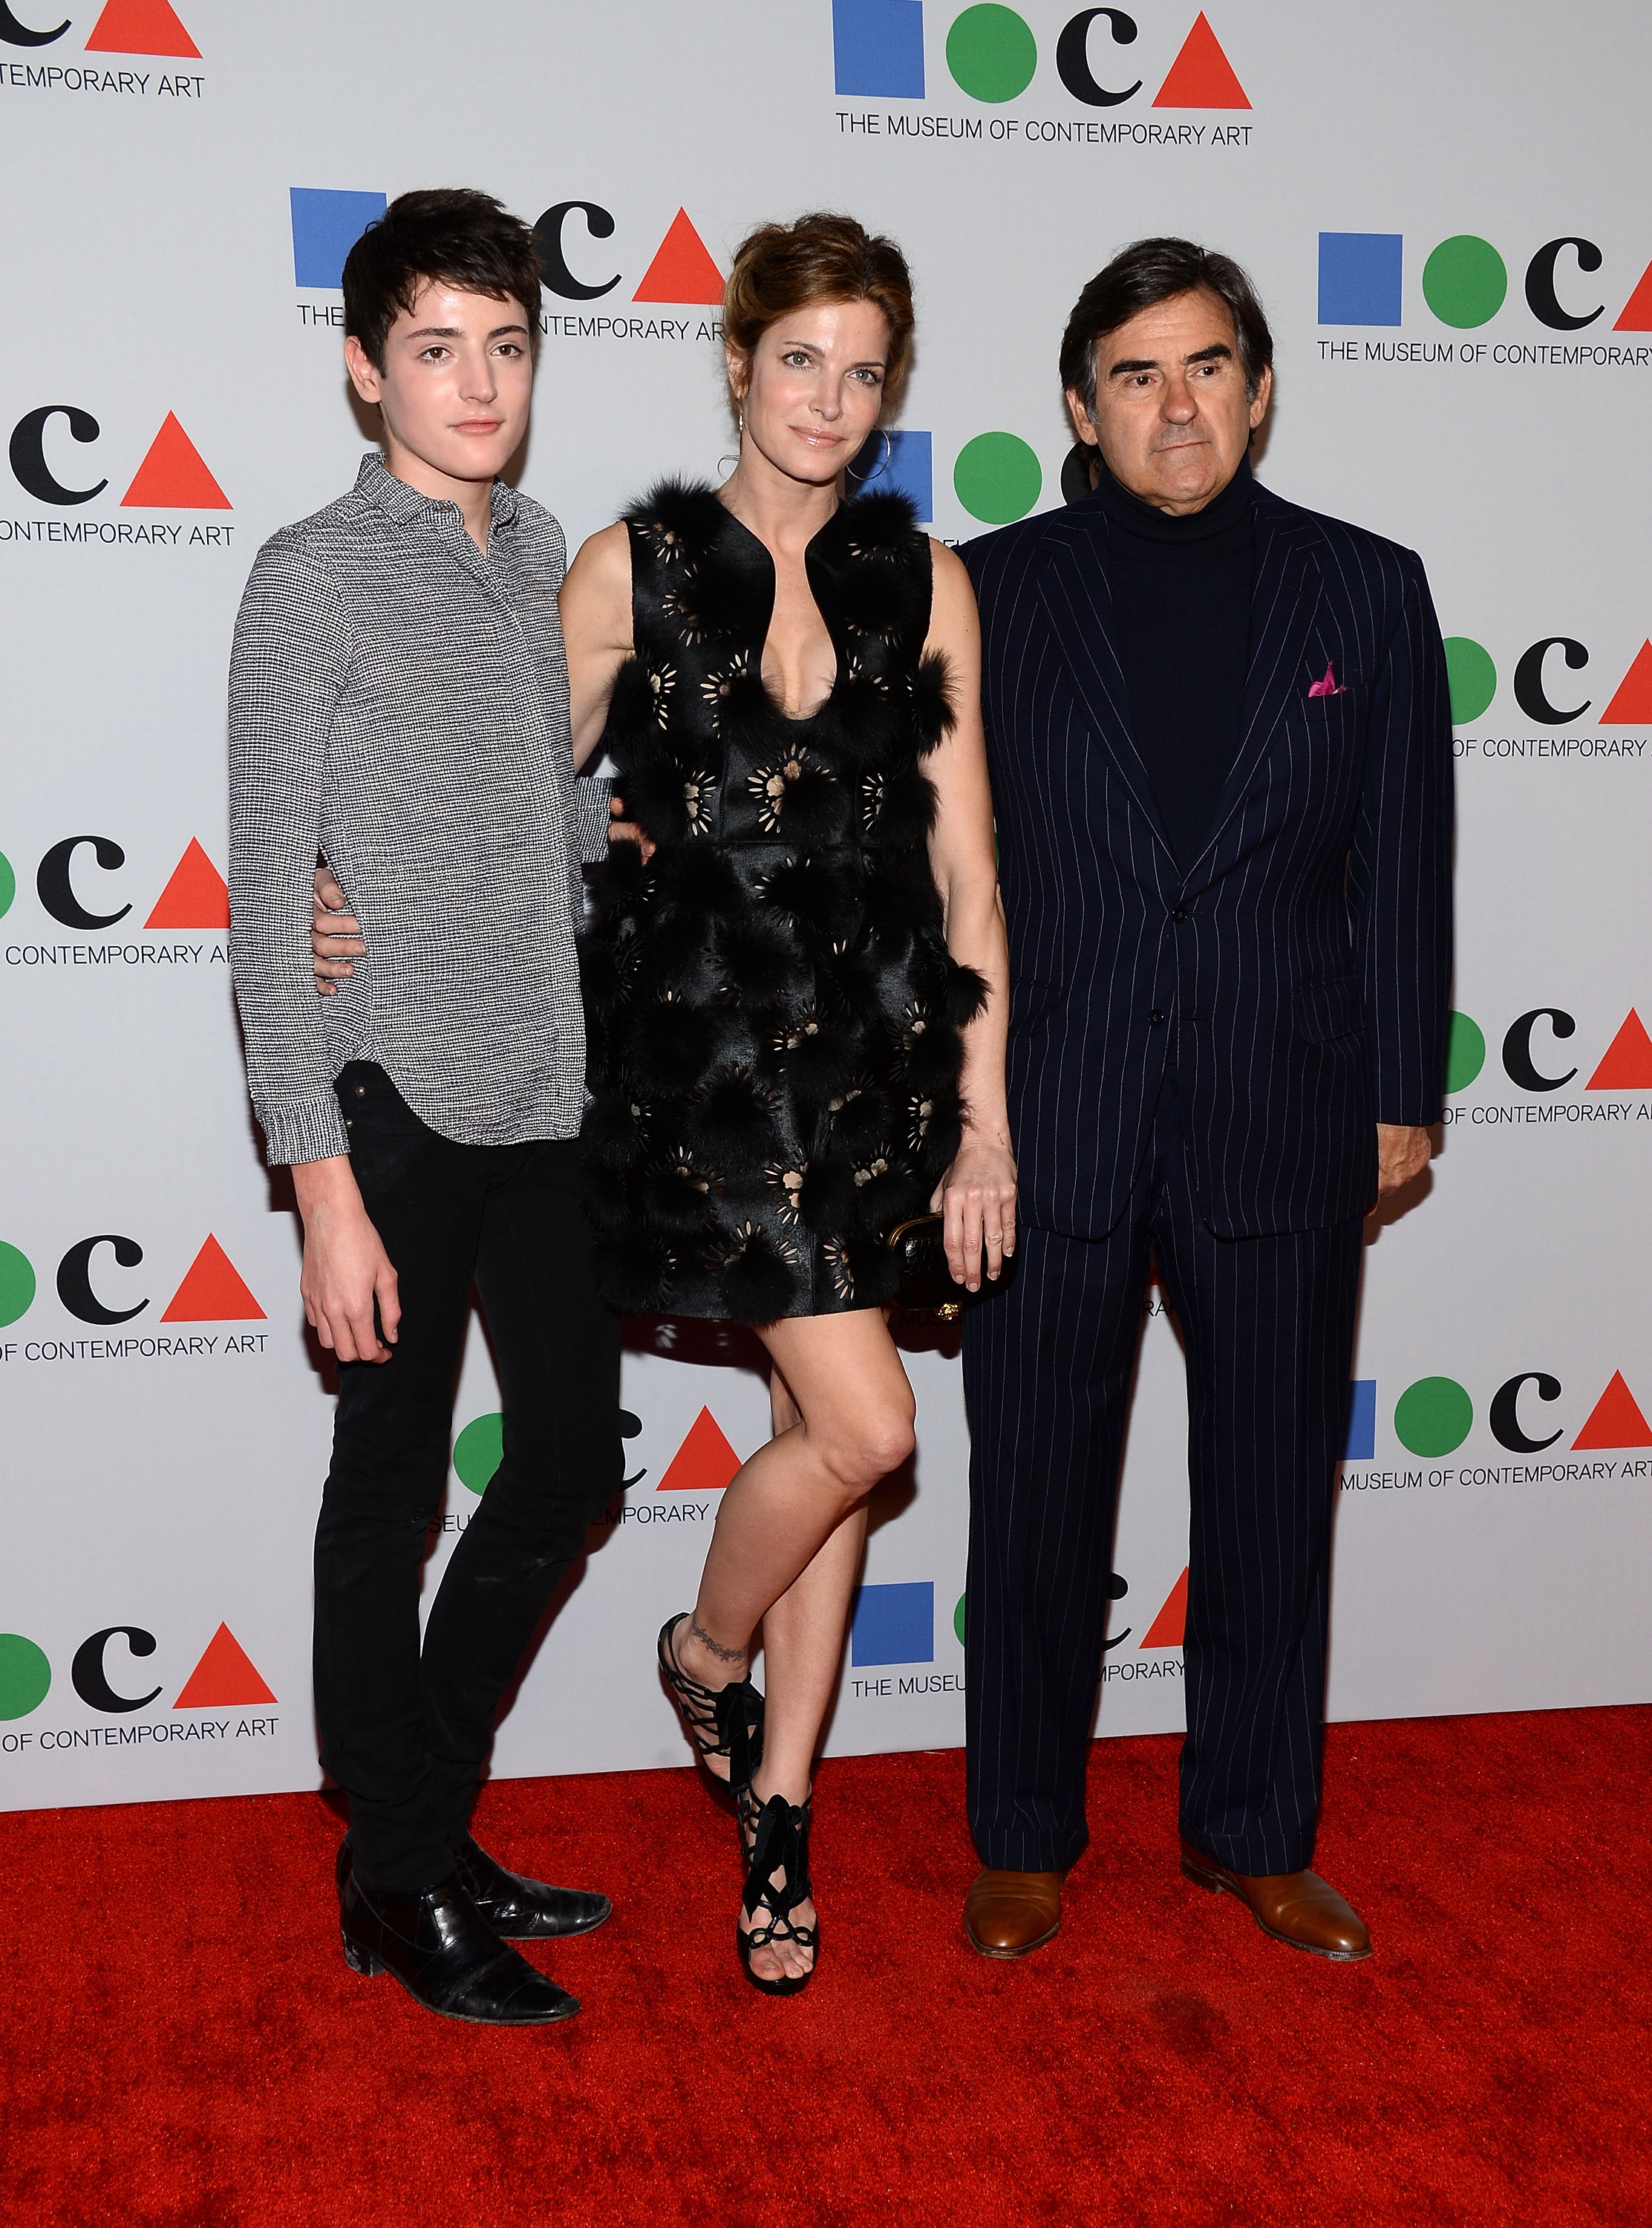 Who is Peter Brant and what is his net worth?